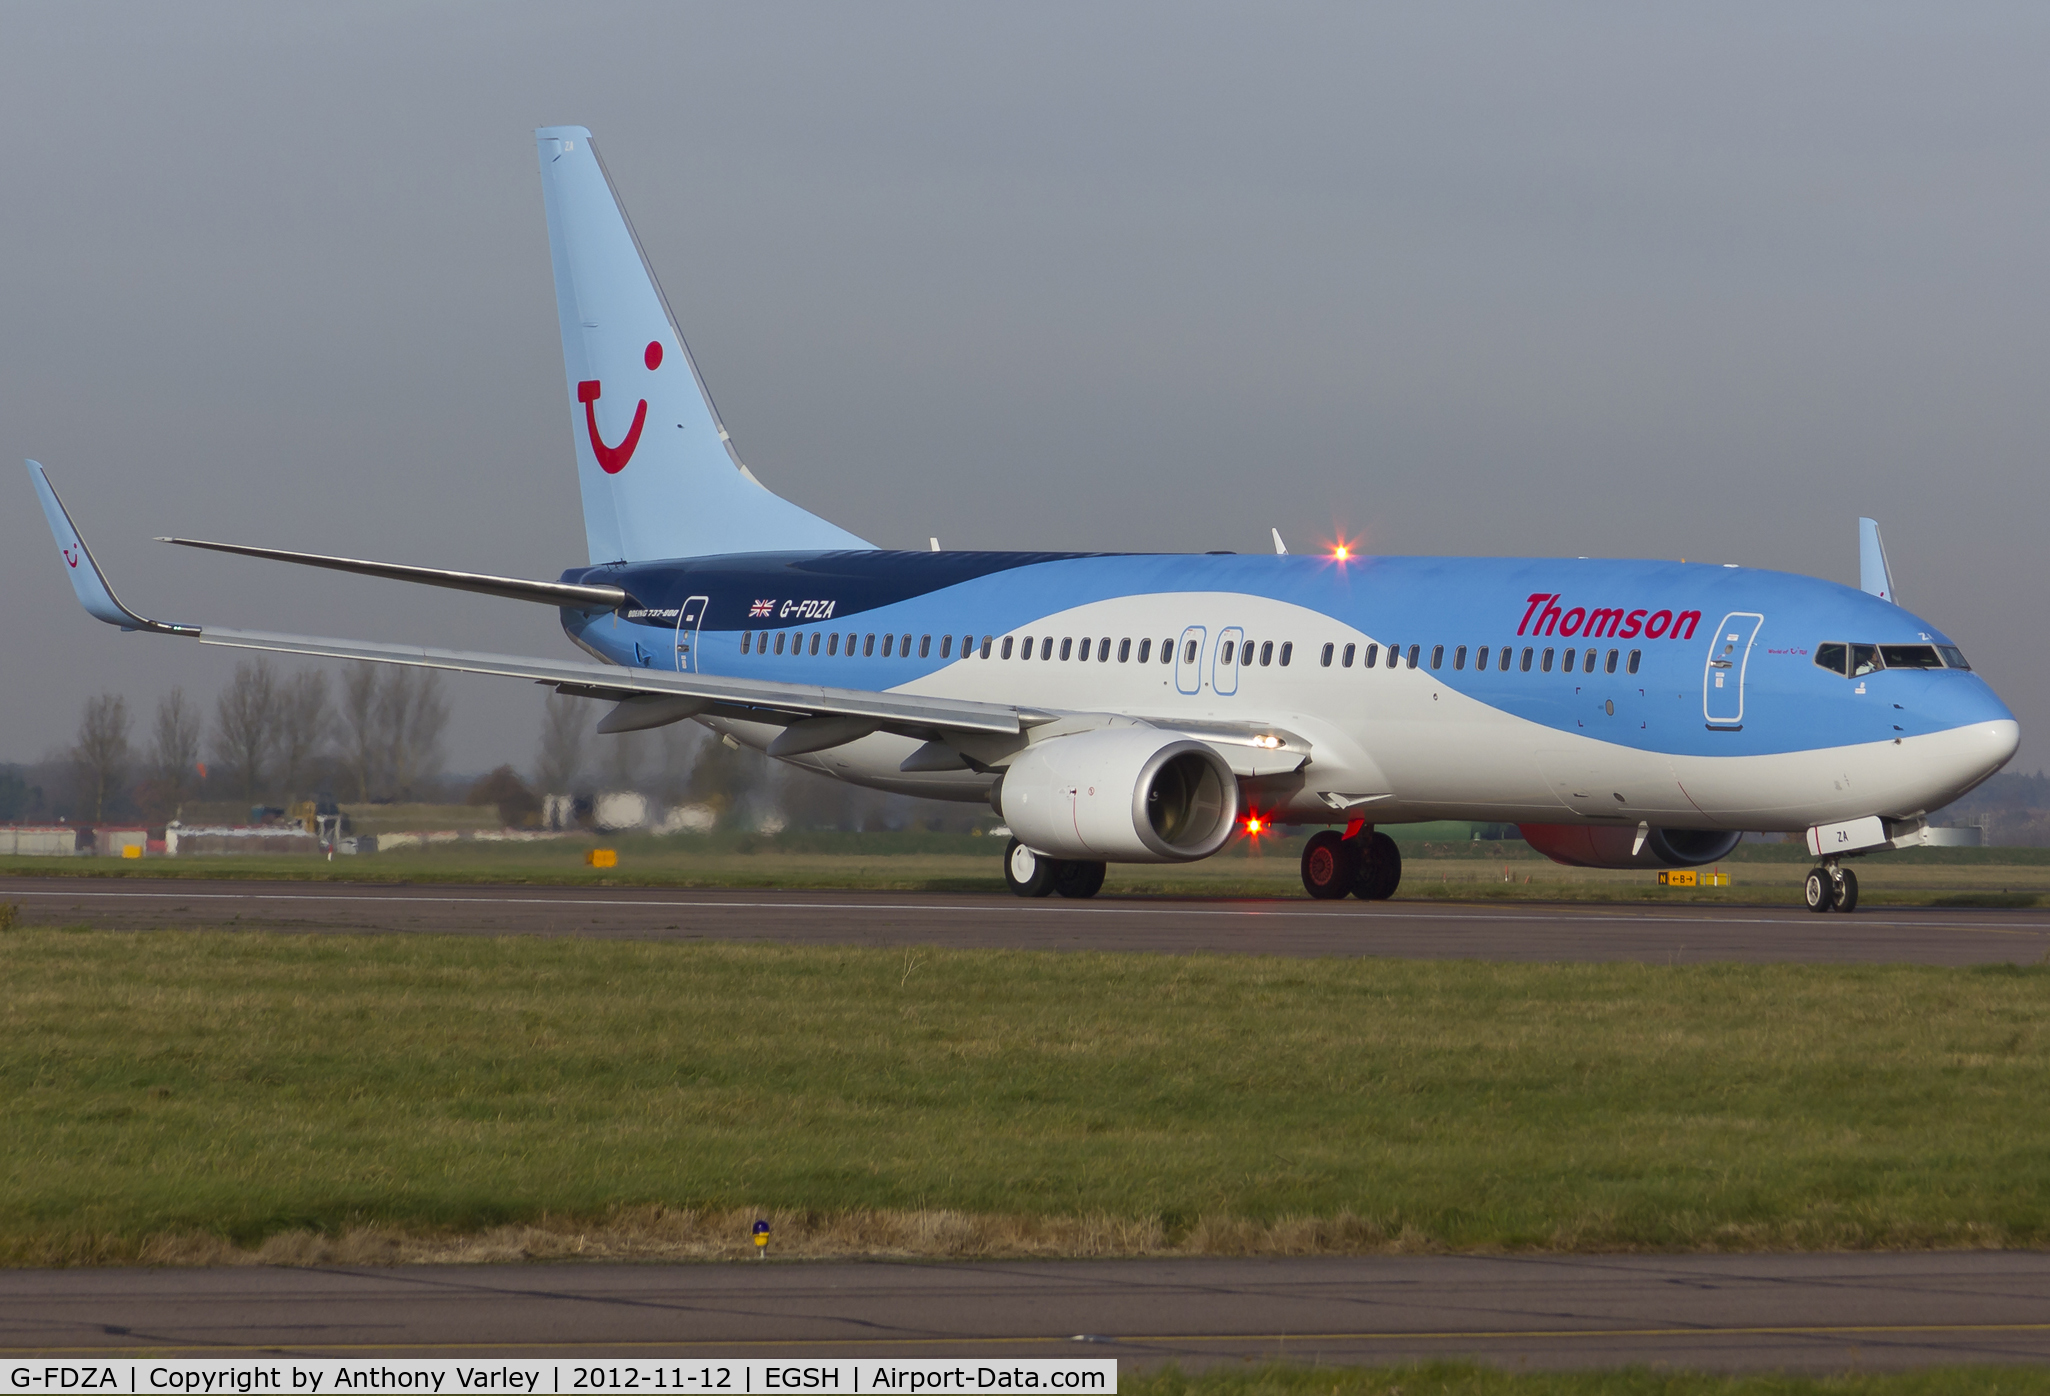 G-FDZA, 2007 Boeing 737-8K5 C/N 35134, Departing after spray into Thomson's Dreamliner livery.